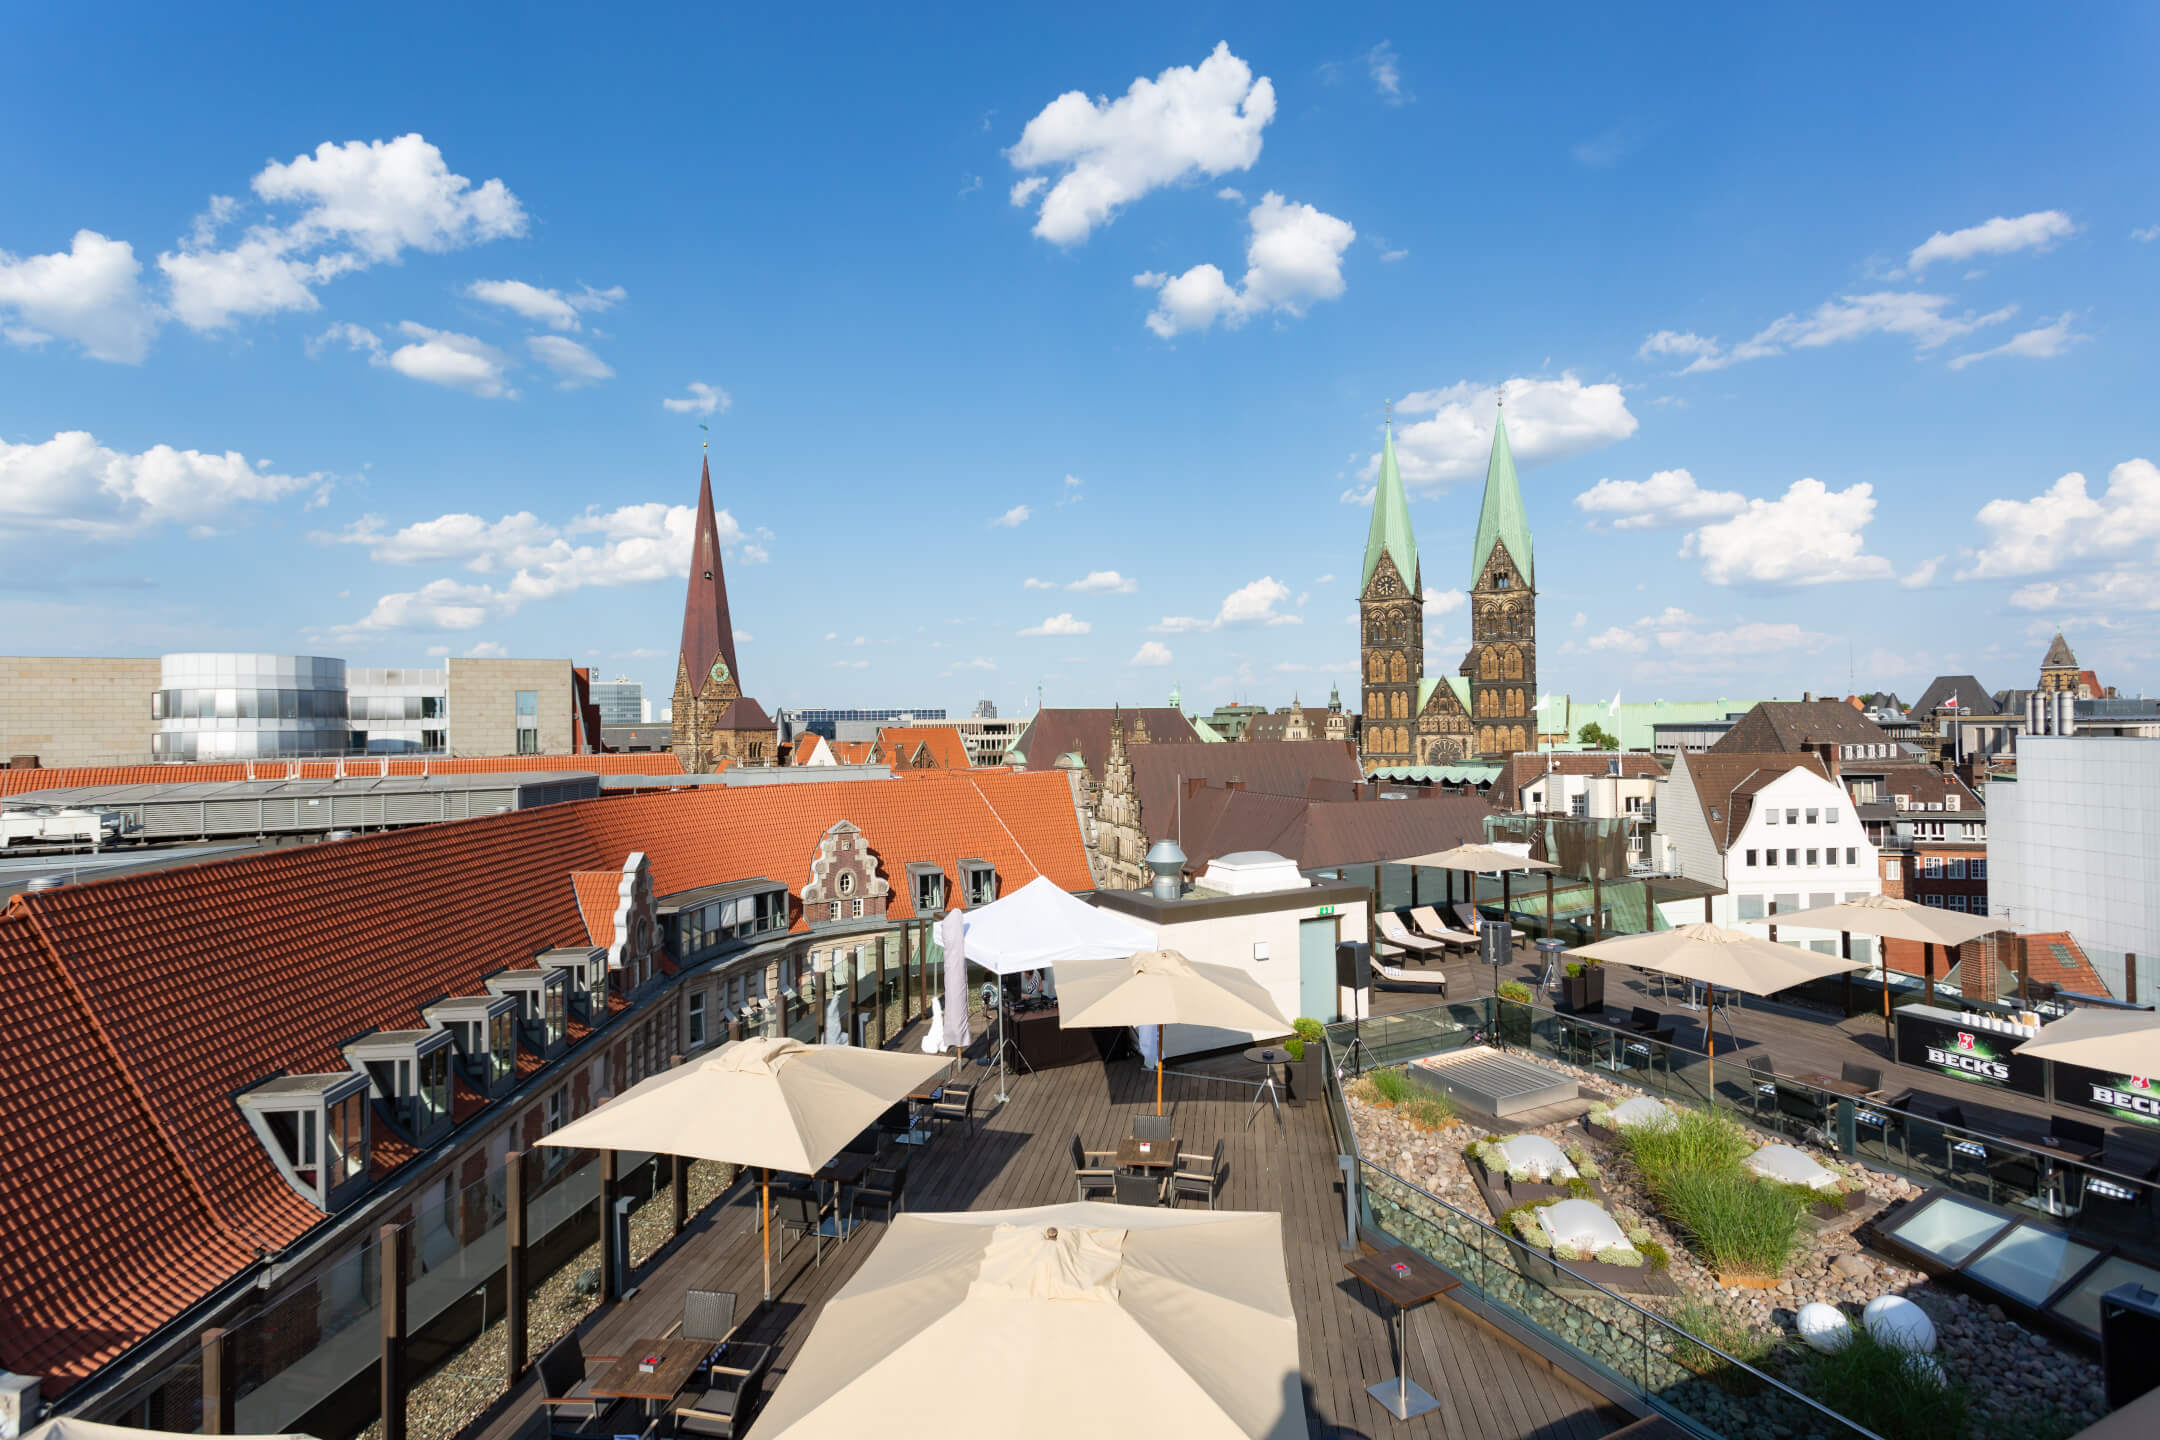 The view from the roof terrace over the rooftops of Bremen